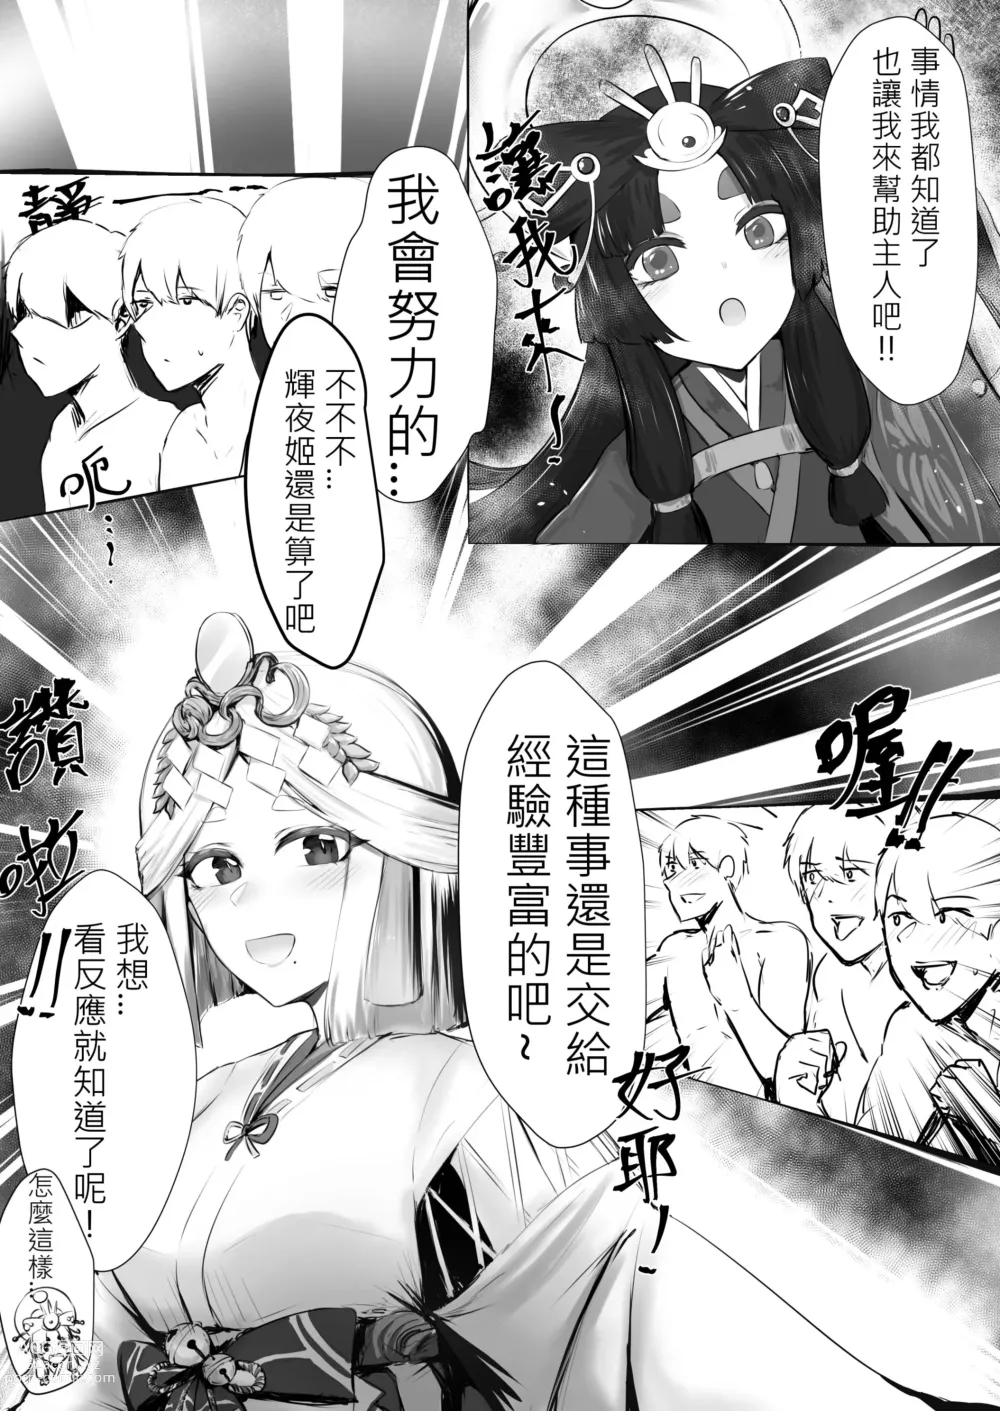 Page 3 of doujinshi 繪世妄想Part5